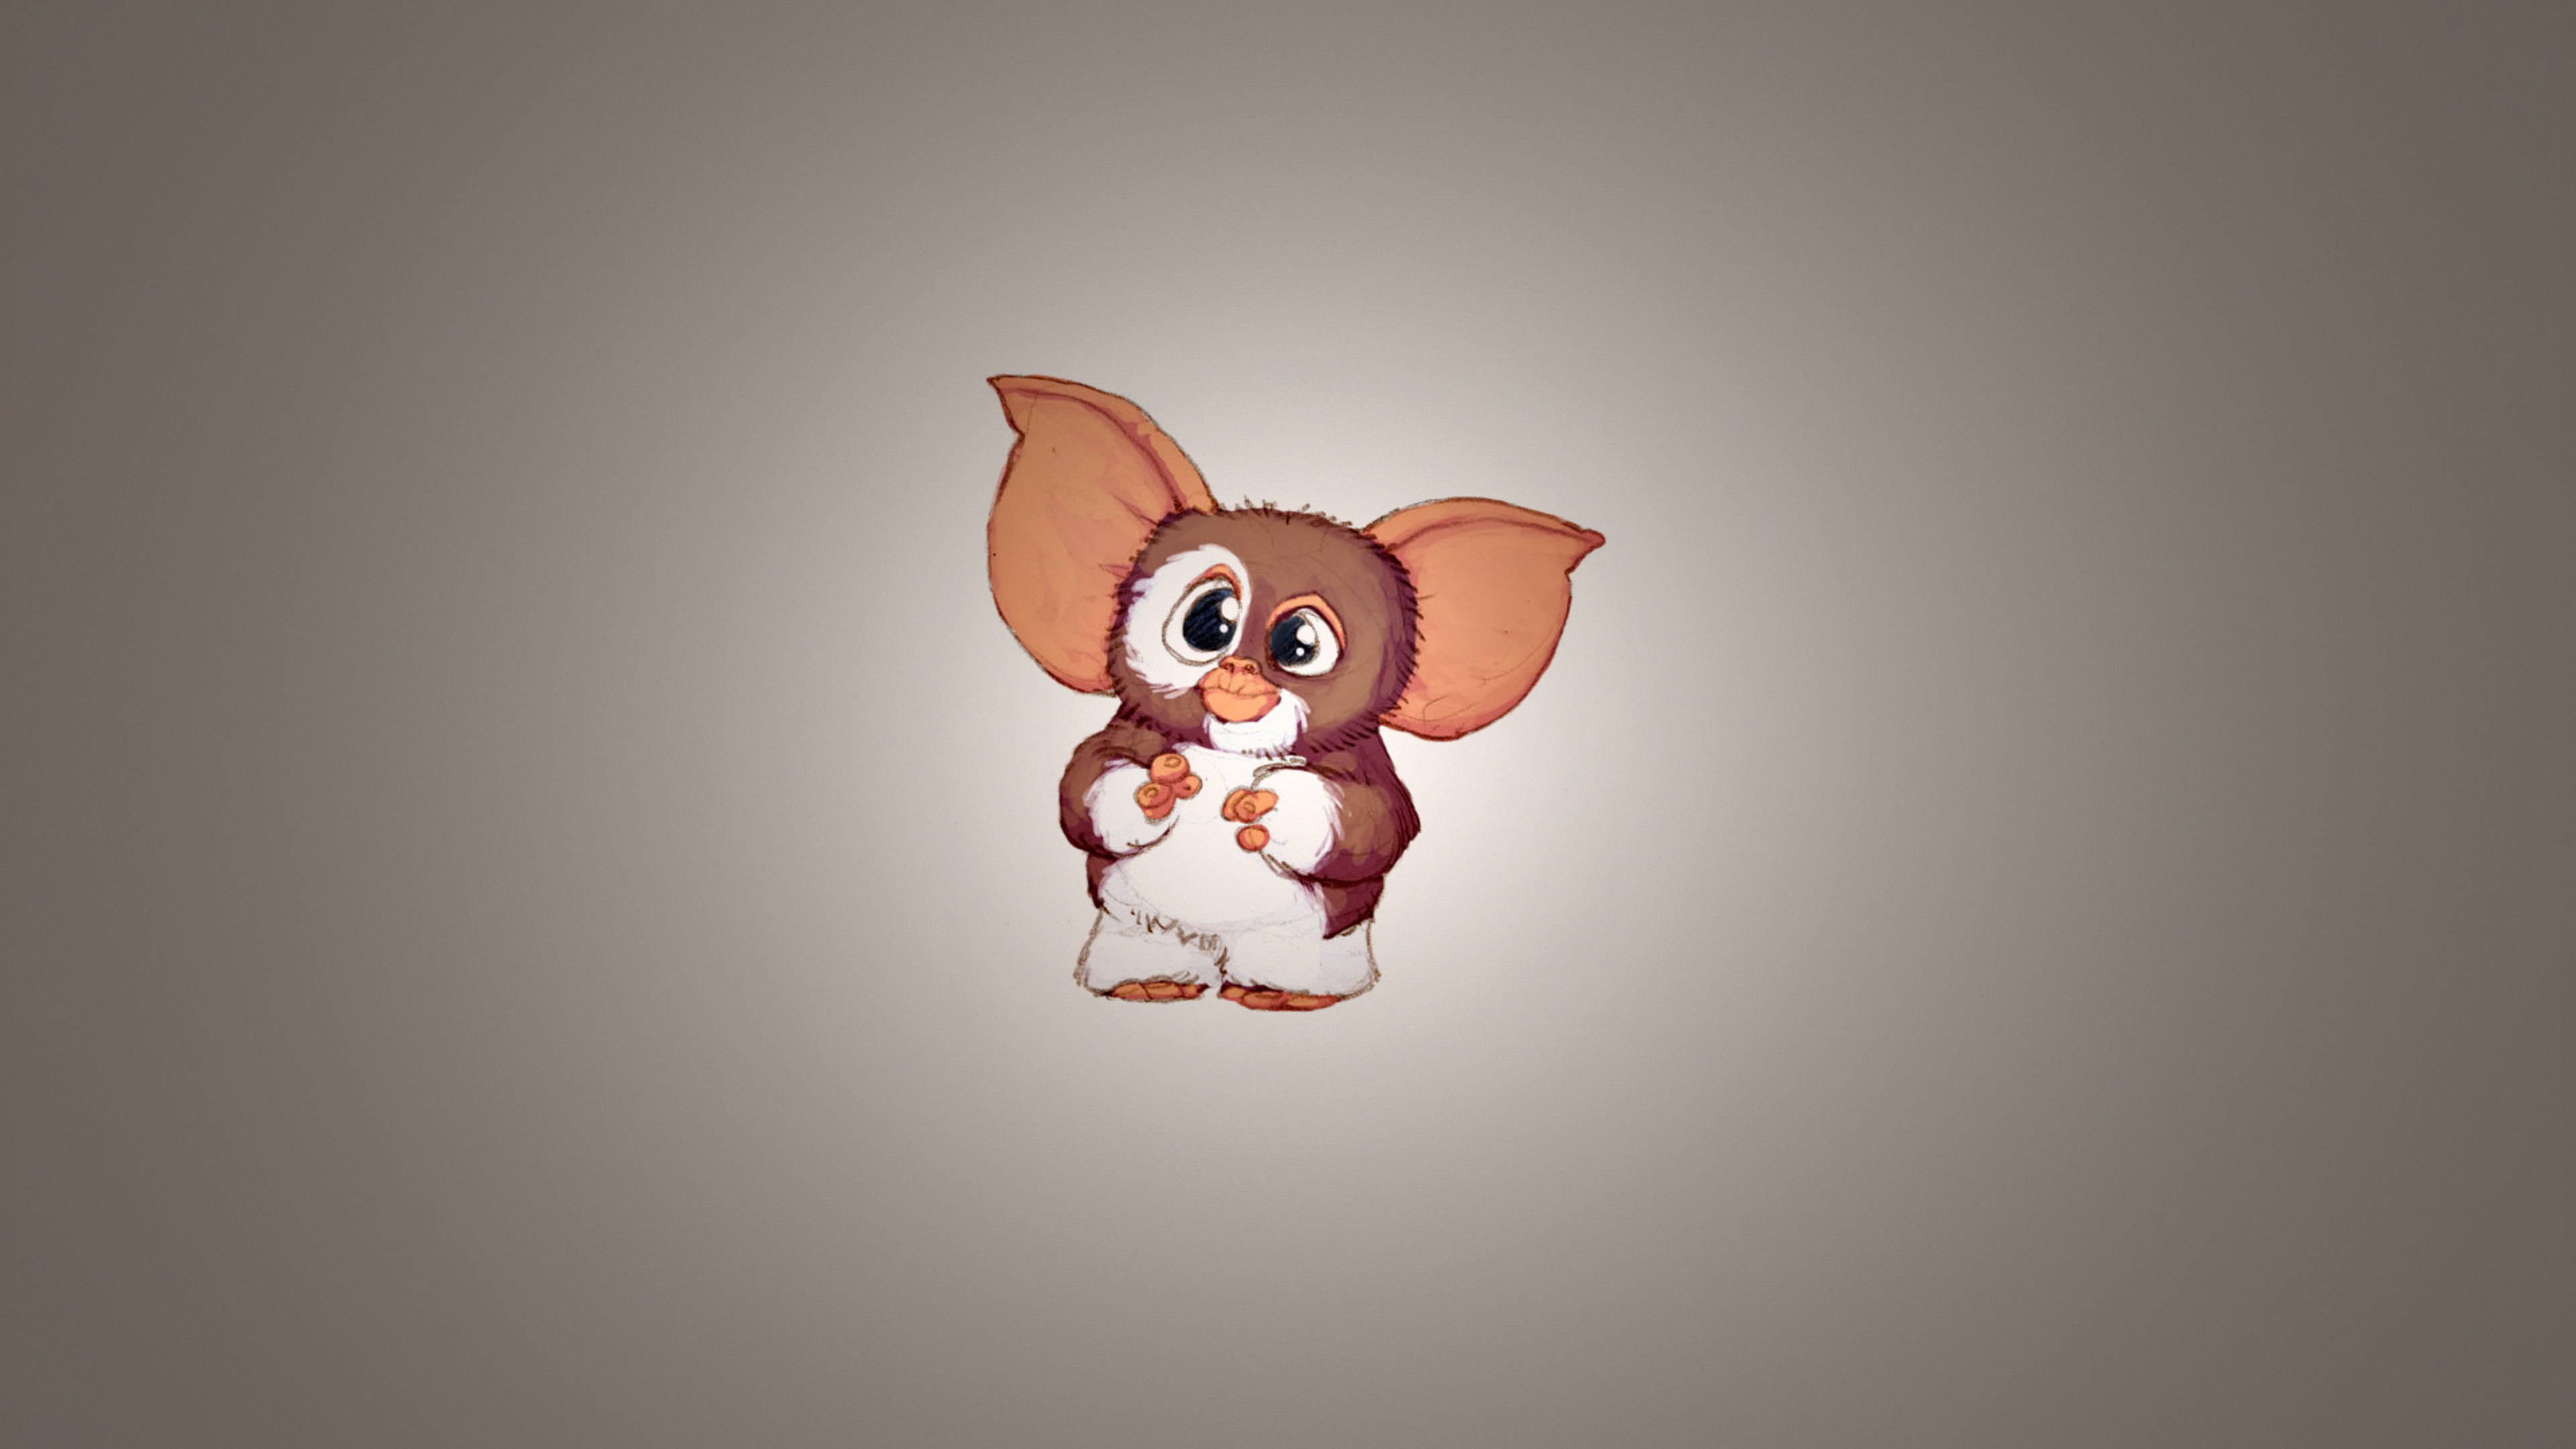 Gremlin: The infamous cute, kind, lovable, adorable Mogwai, A name that means a gadget. 3840x2160 4K Background.